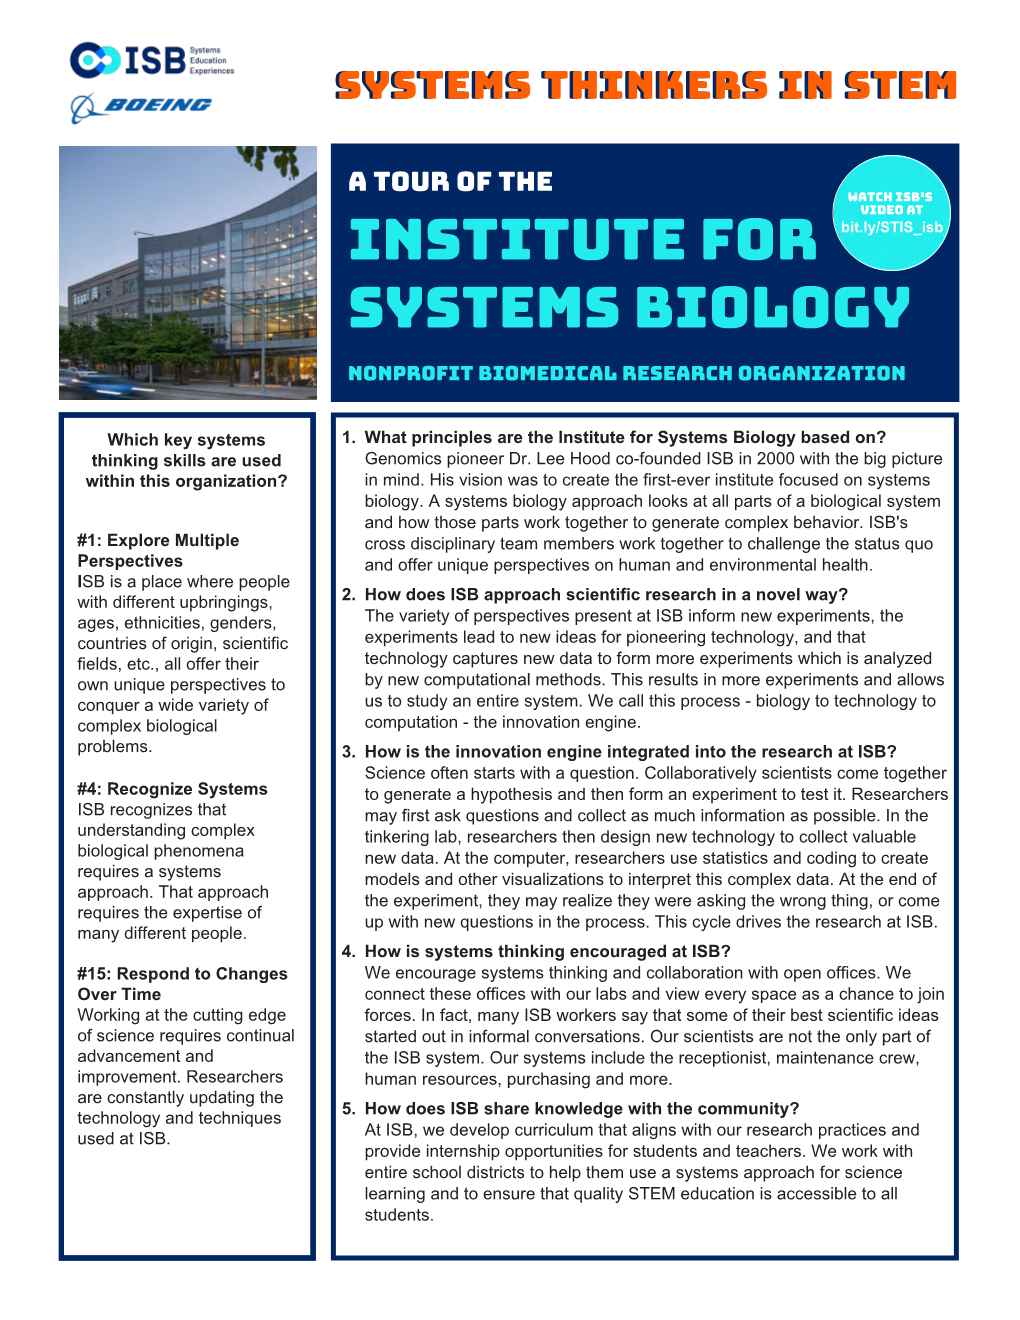 Read About the Institute for Systems Biology